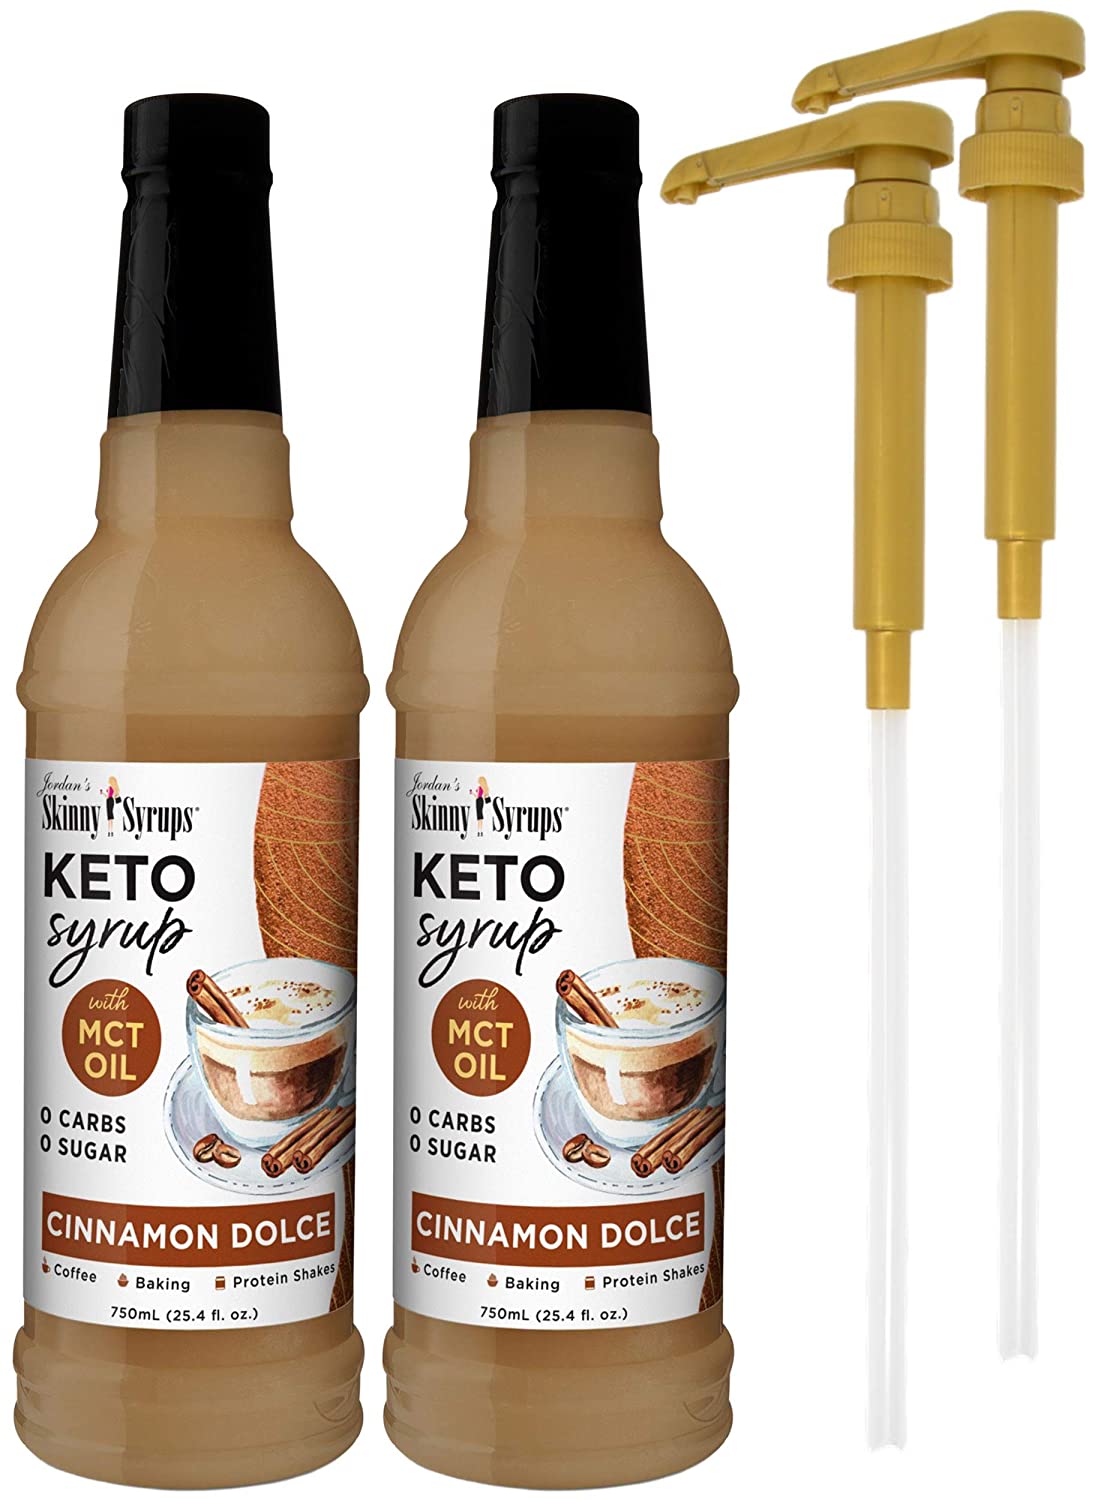 Jordan's Skinny Syrups Keto Cinnamon Dolce with MCT Oil 750 ml Bottles (Pack of 2) and 2 By The Cup Syrup Pumps